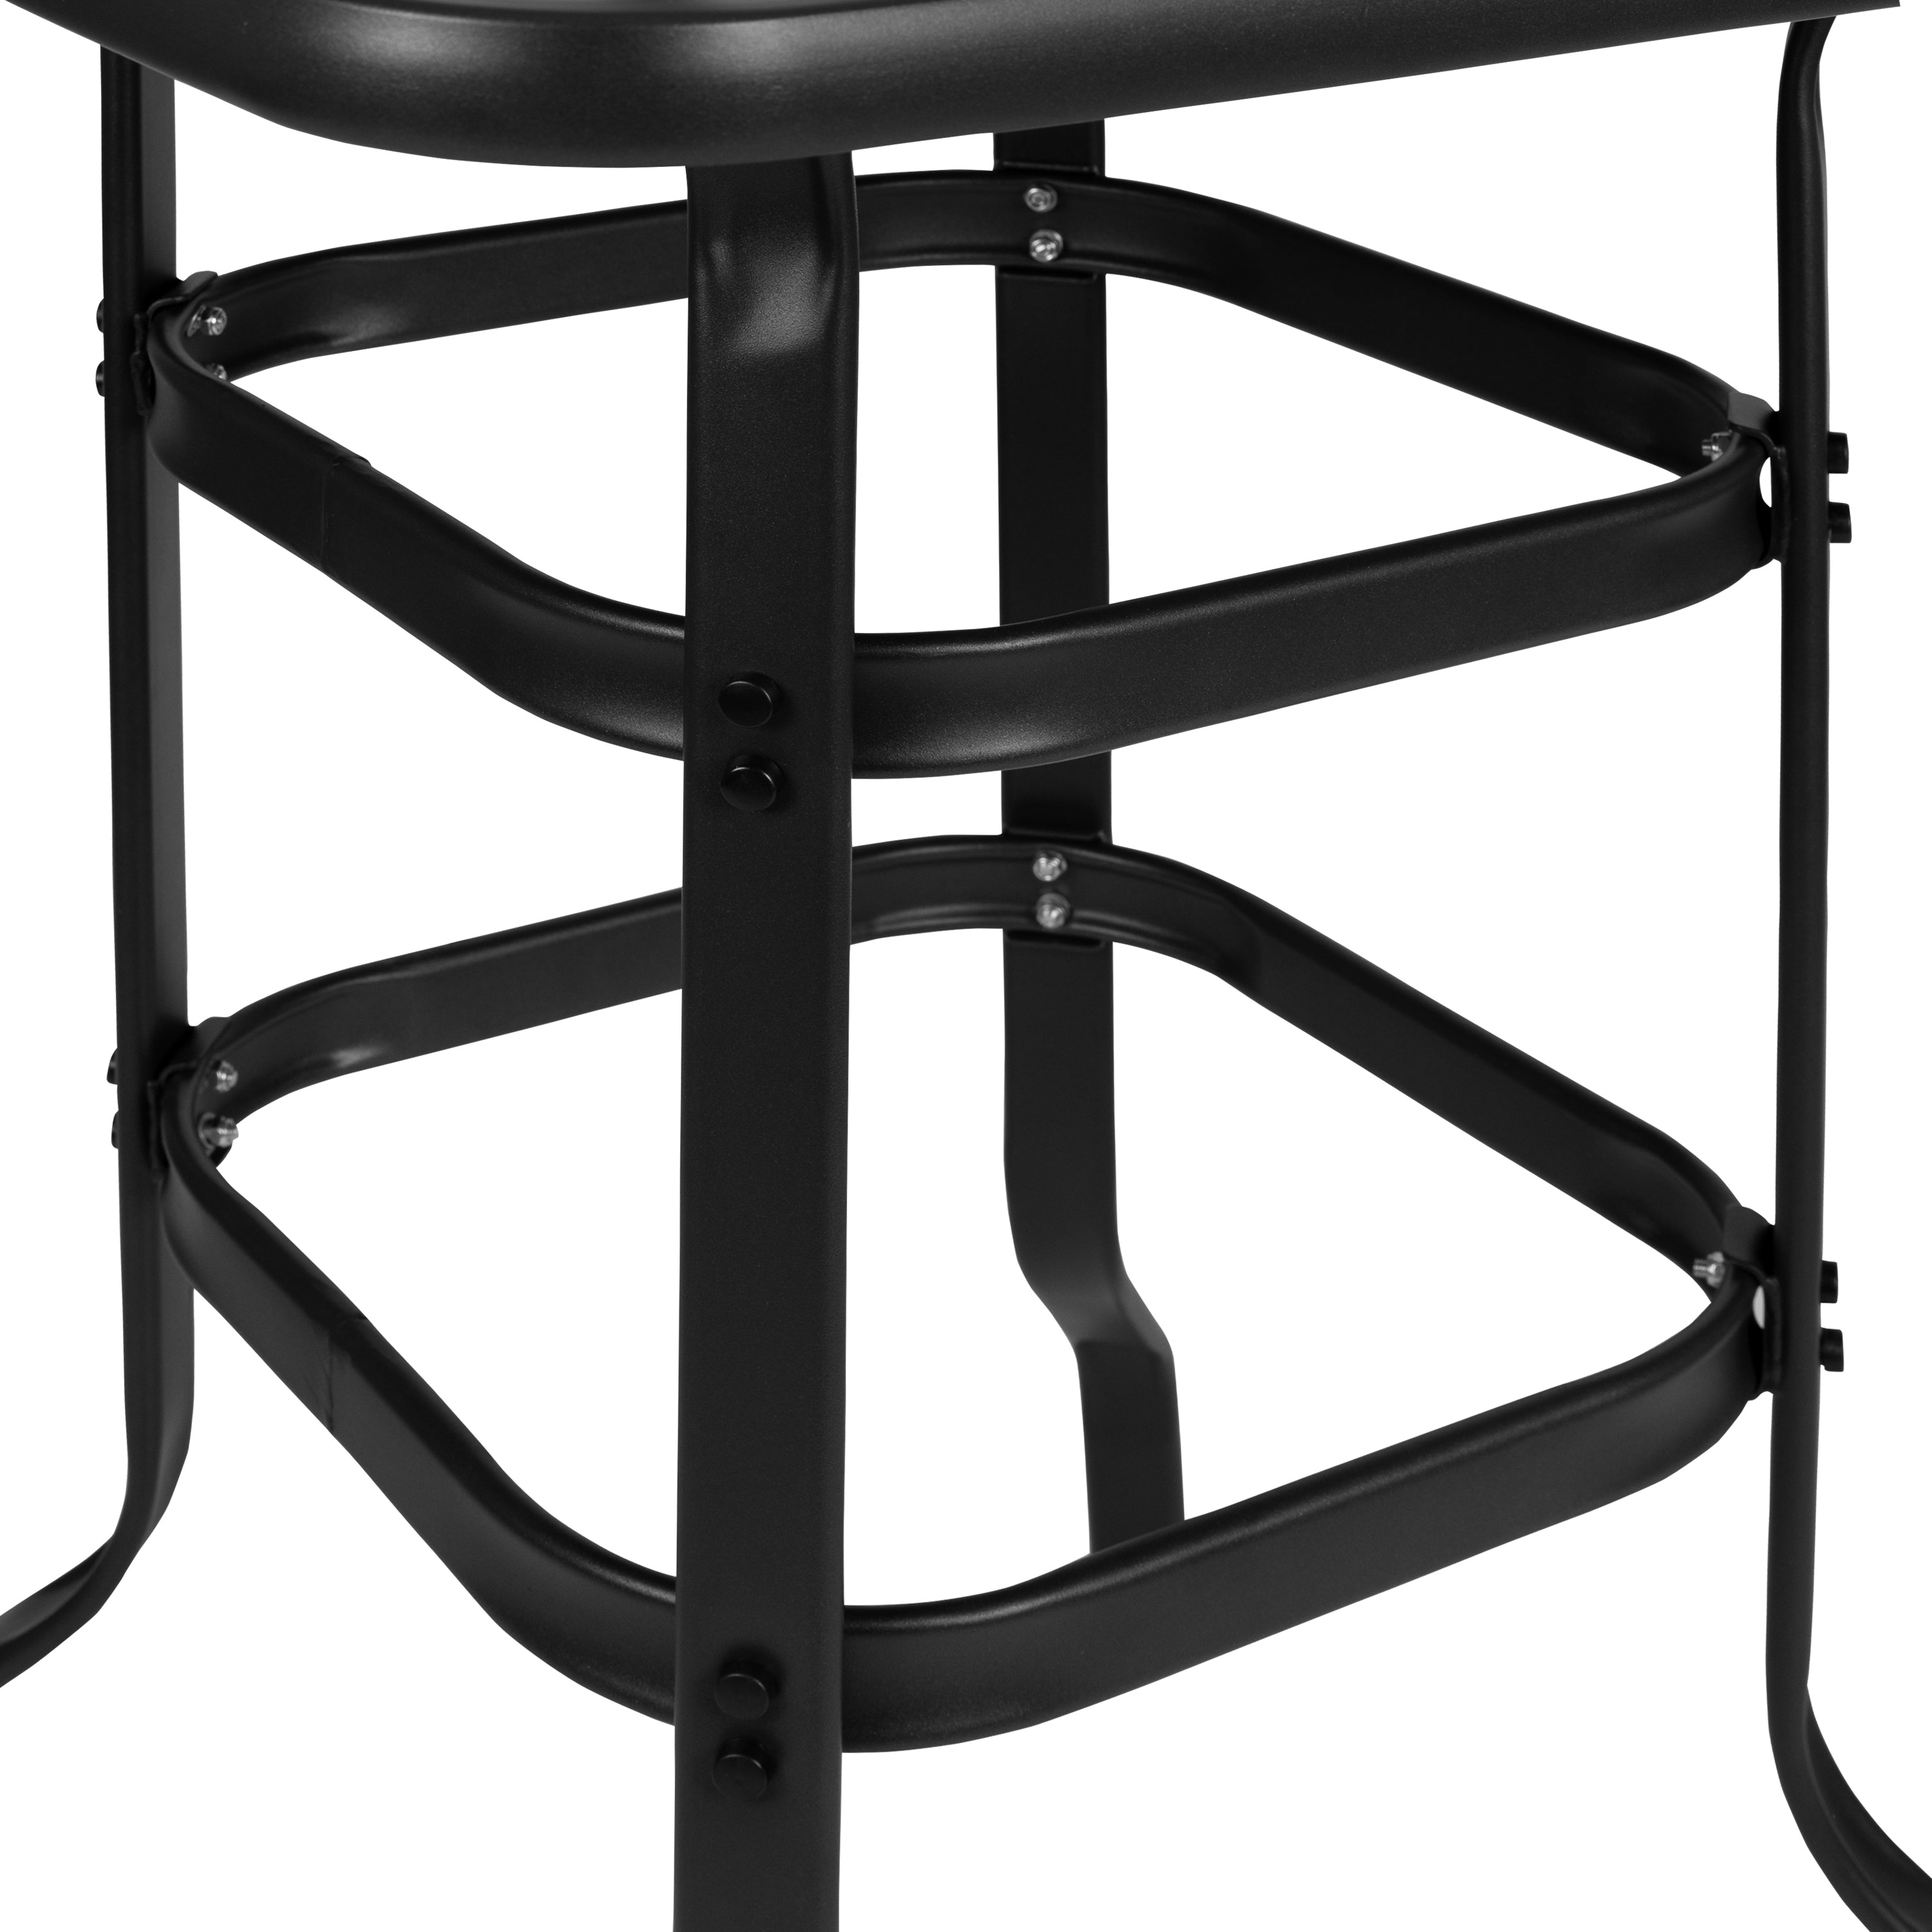 Brazos Outdoor Dining Set - 4-Person Bistro Set - Outdoor Glass Bar Table with All-Weather Patio Stools-Indoor/Outdoor Dining Sets-Flash Furniture-Wall2Wall Furnishings